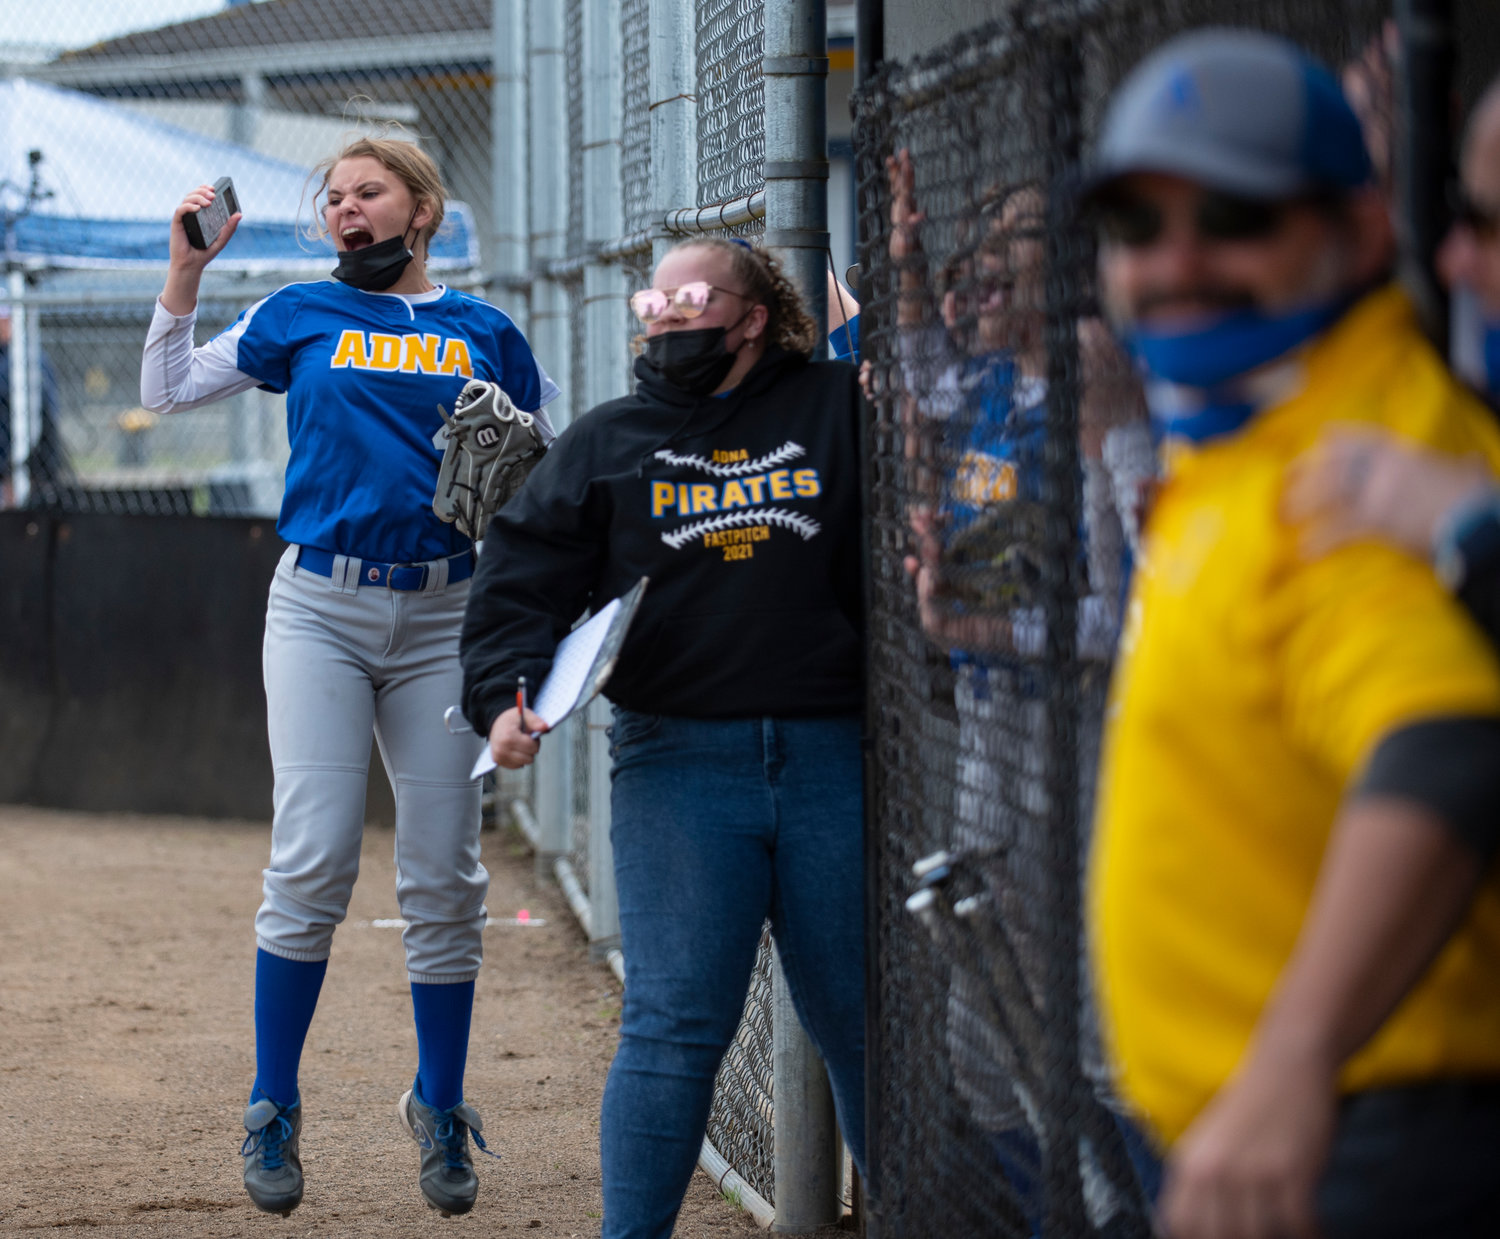 Adna's Gracie Beaulieu, left, jumps in celebration after Karle Von Moos' RBI triple breaks a 0-0 tie in the fourth inning.